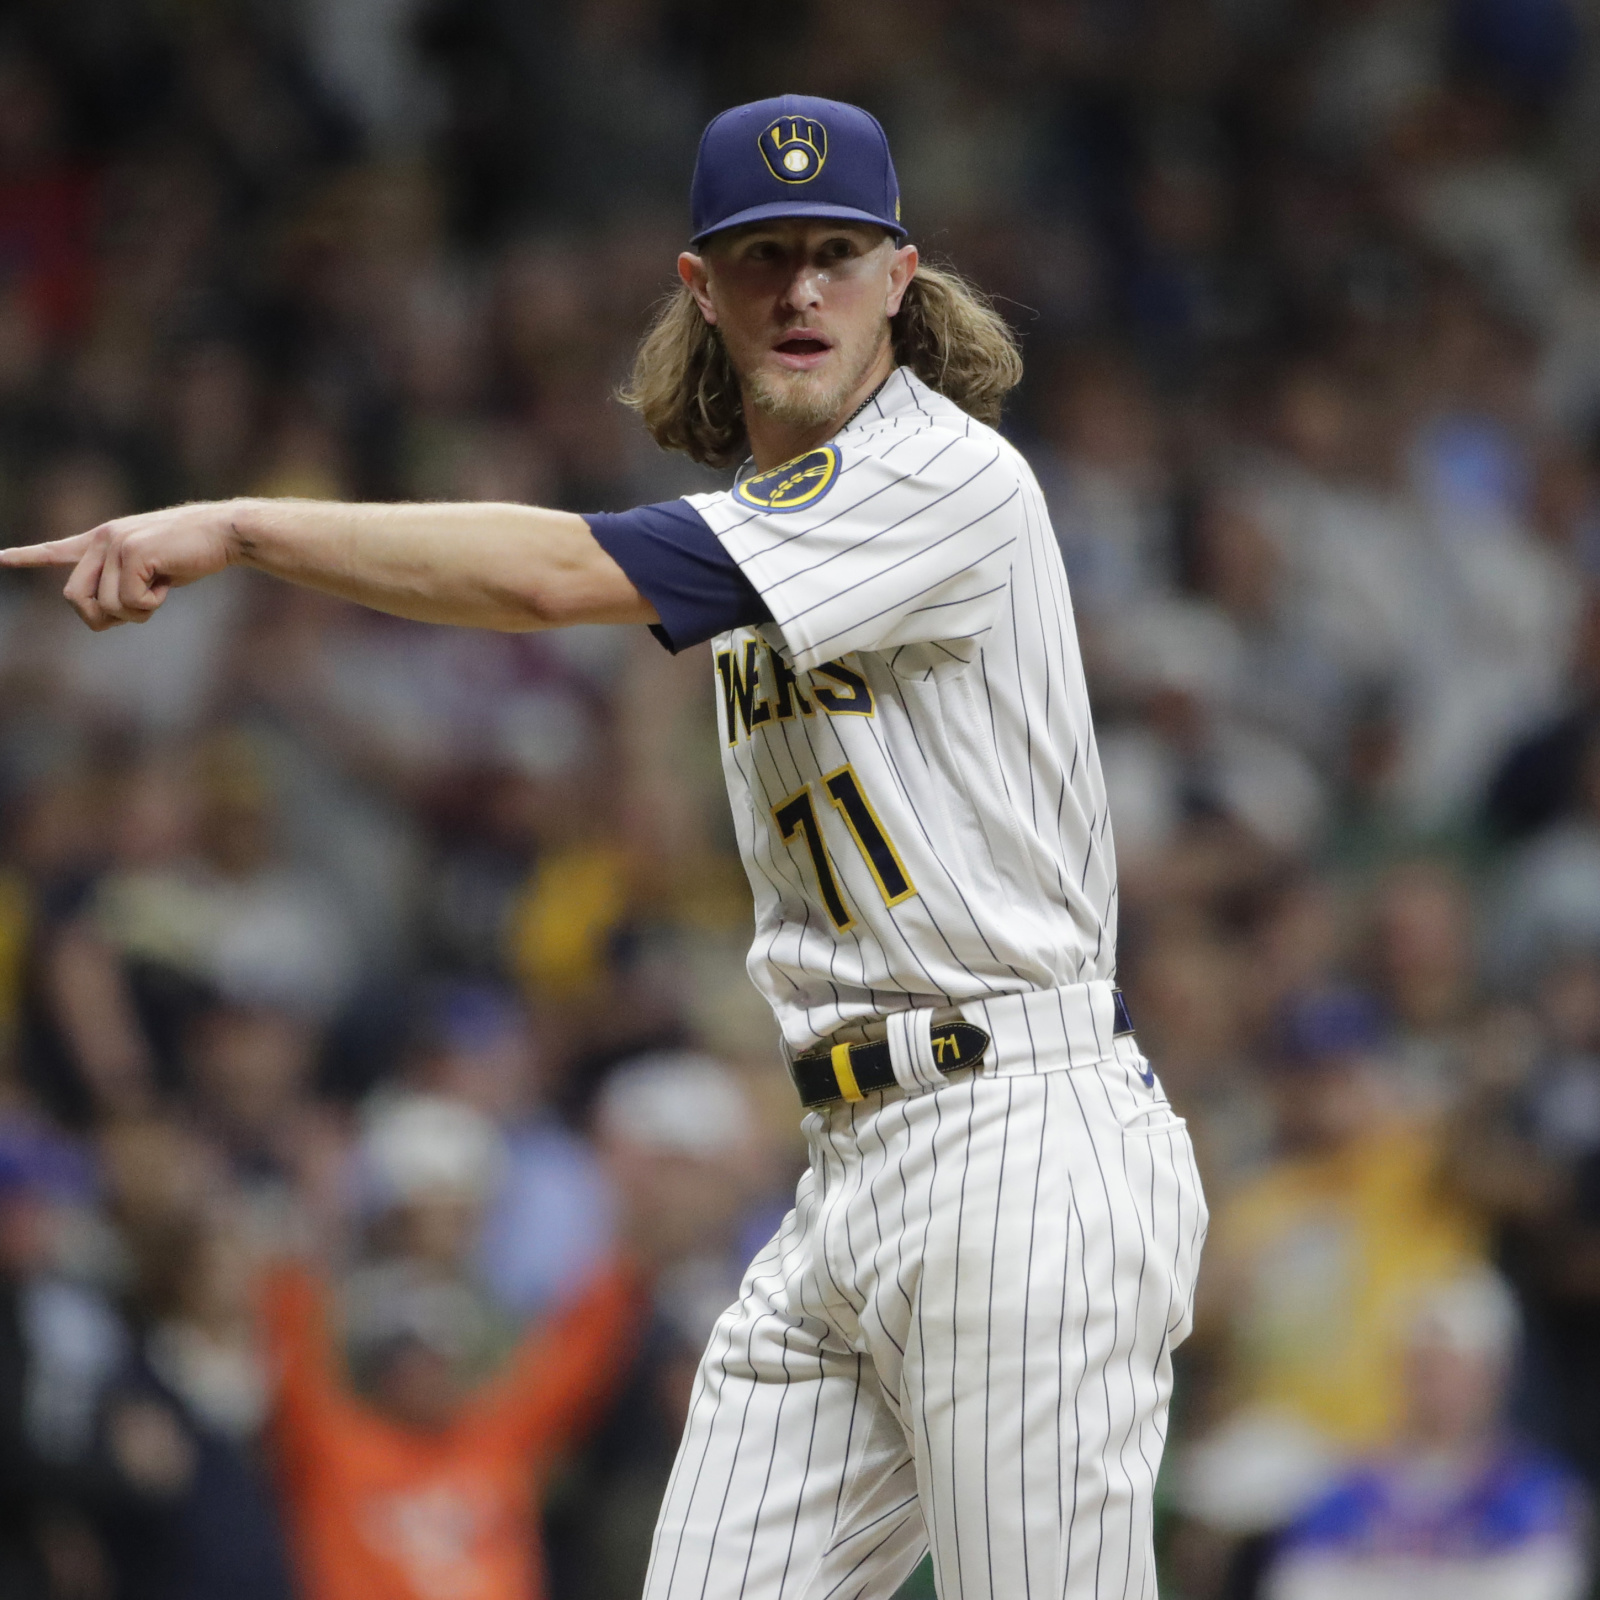 Brewers' closer Josh Hader not participating in 2022 MLB All-Star